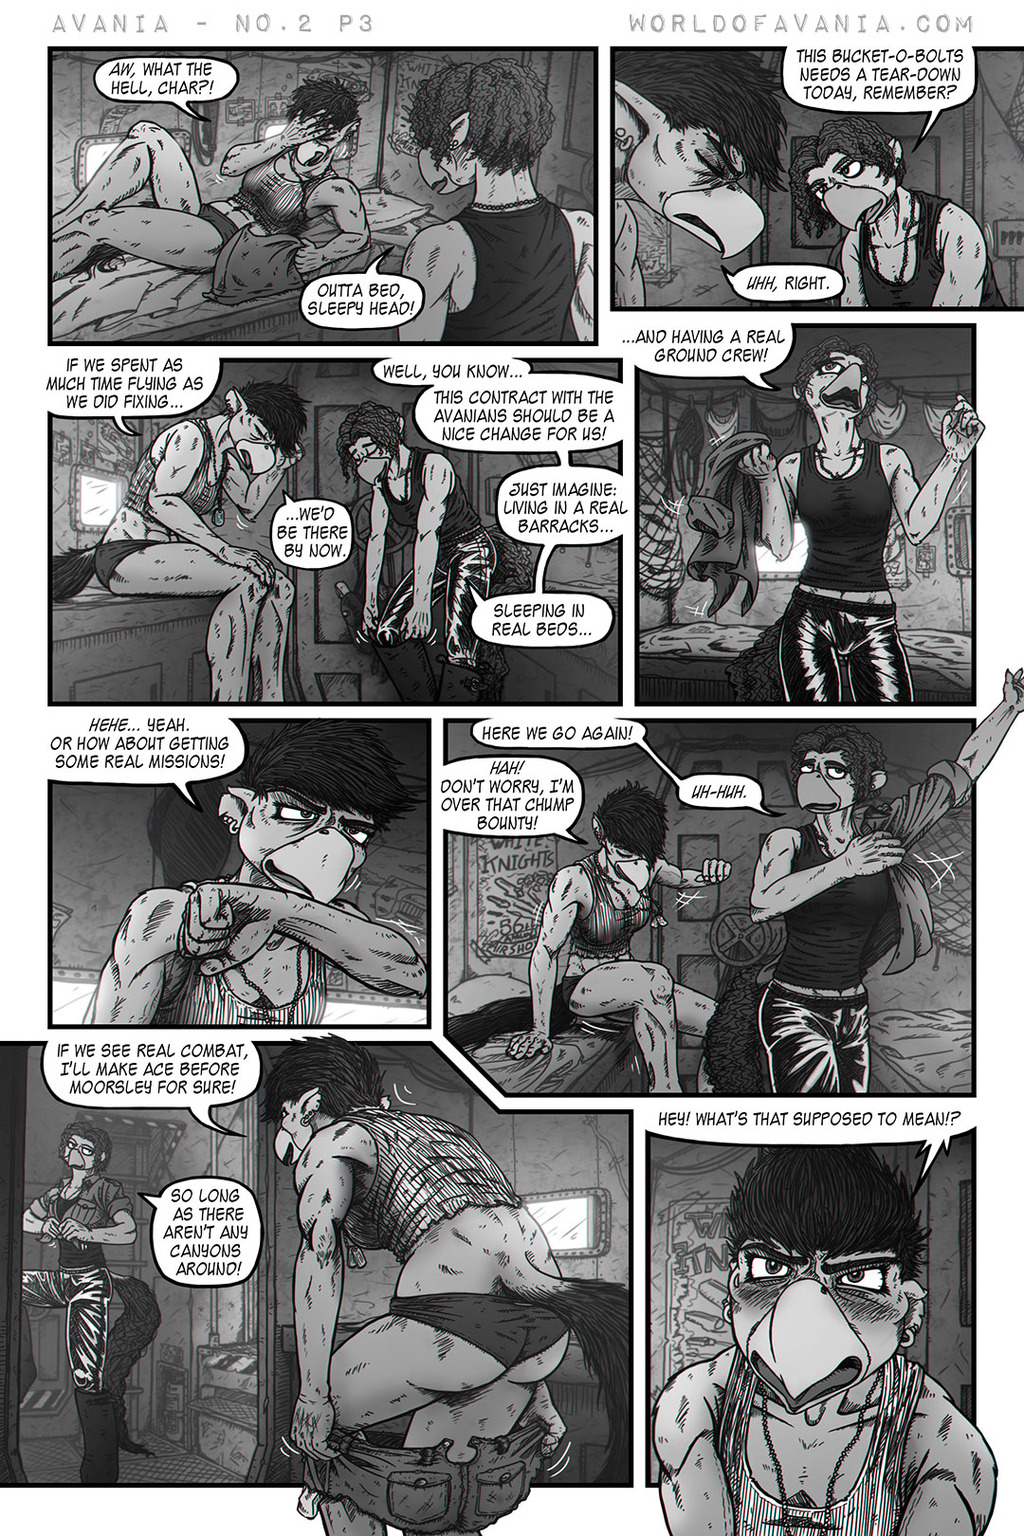 Avania Comic - Issue No.2, Page 3